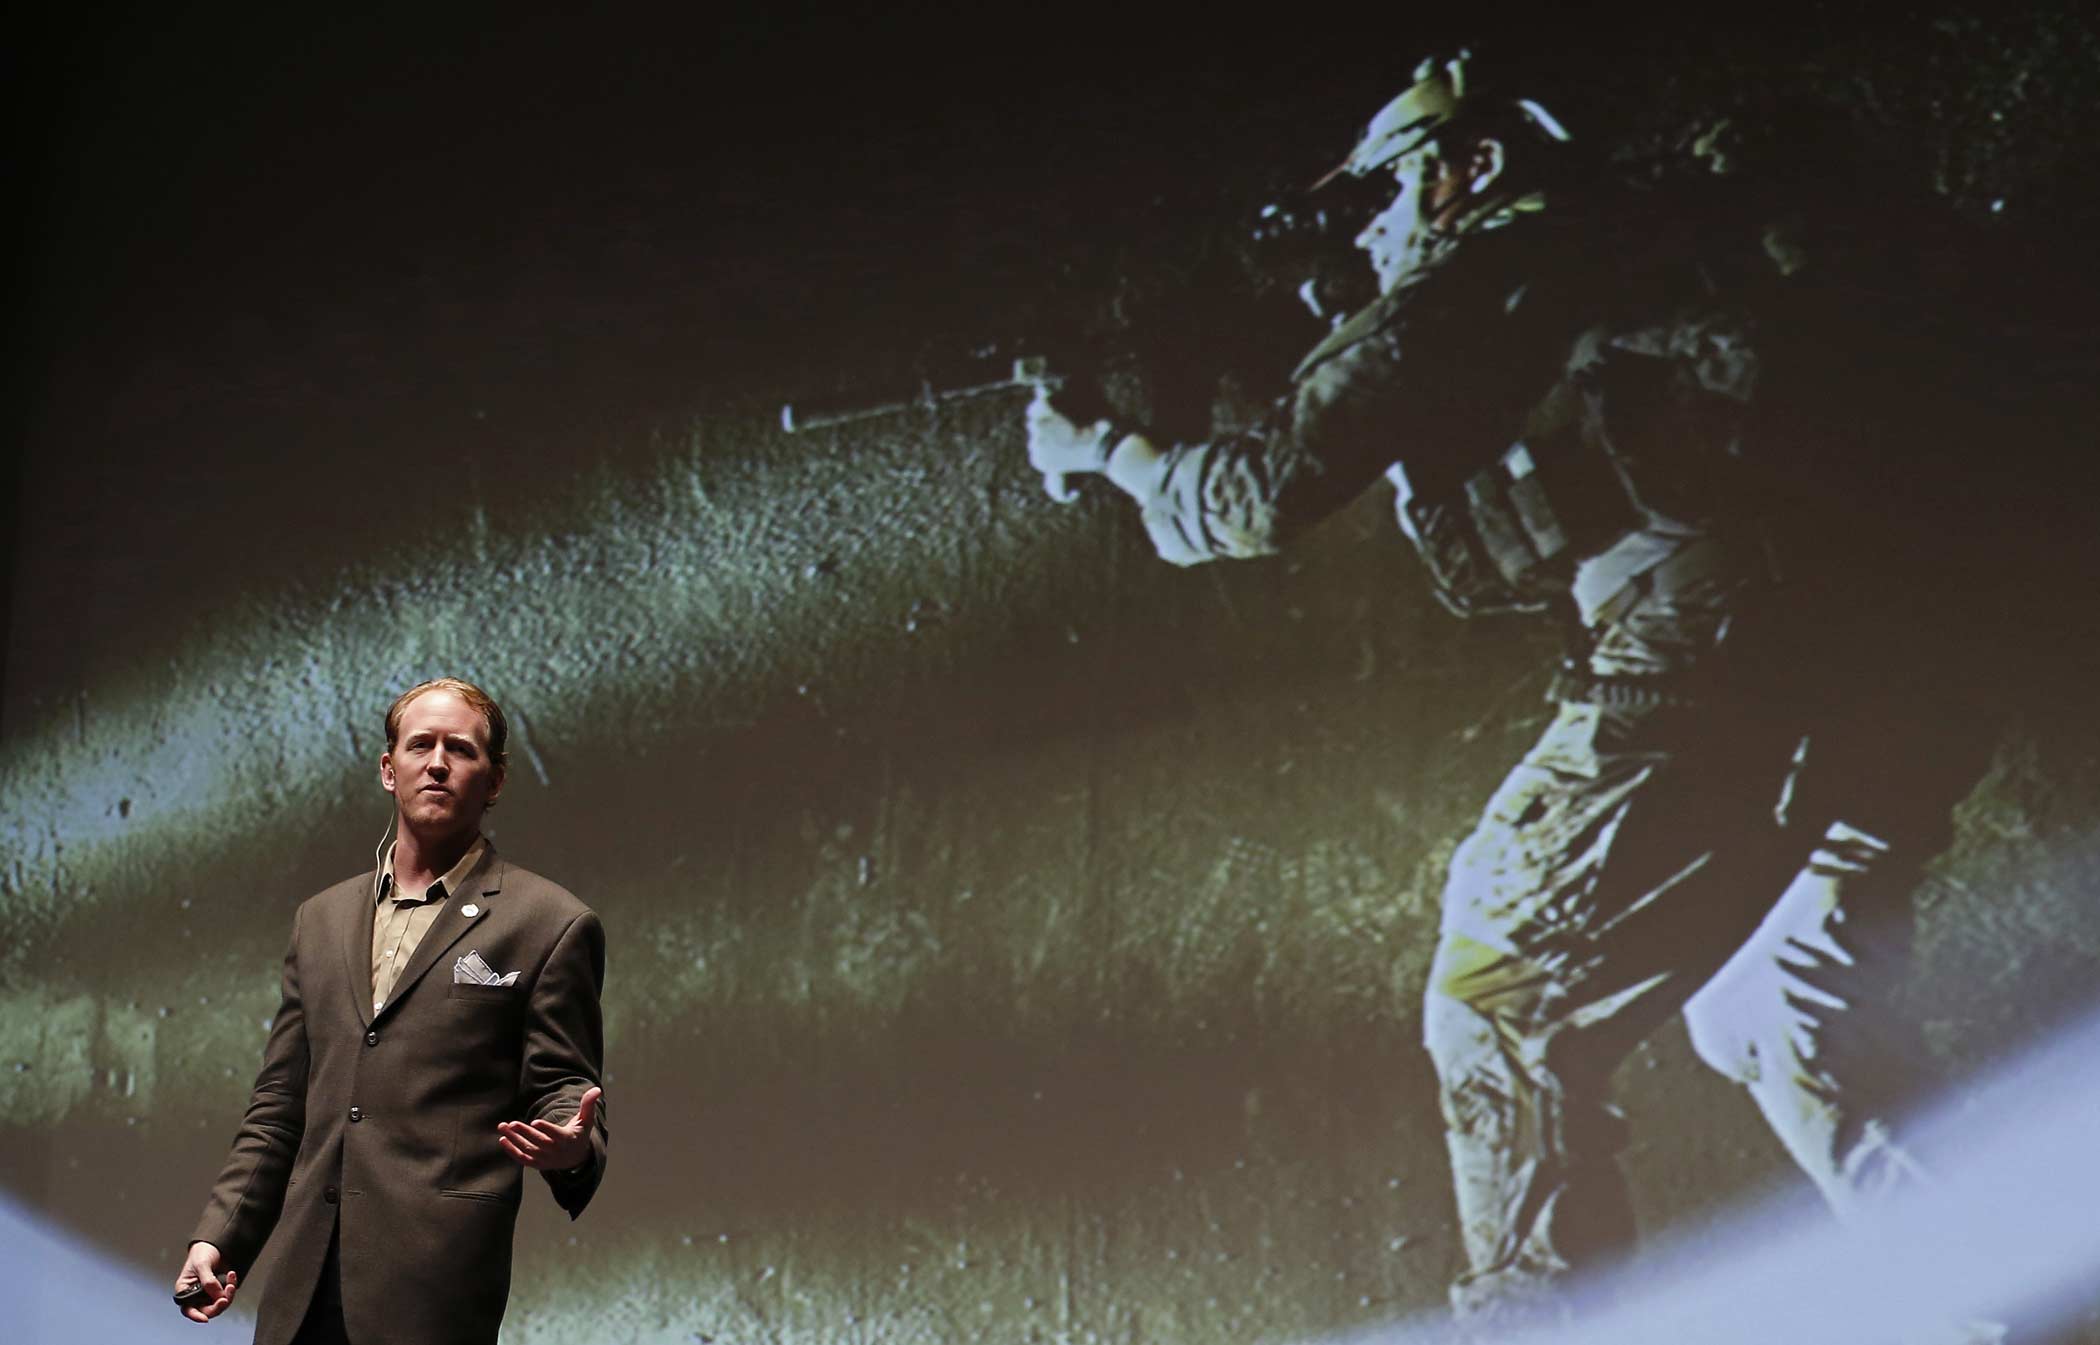 Former Navy SEAL Rob O'Neill Who Killed Osama bin Laden Speaks At Chamber of Commerce